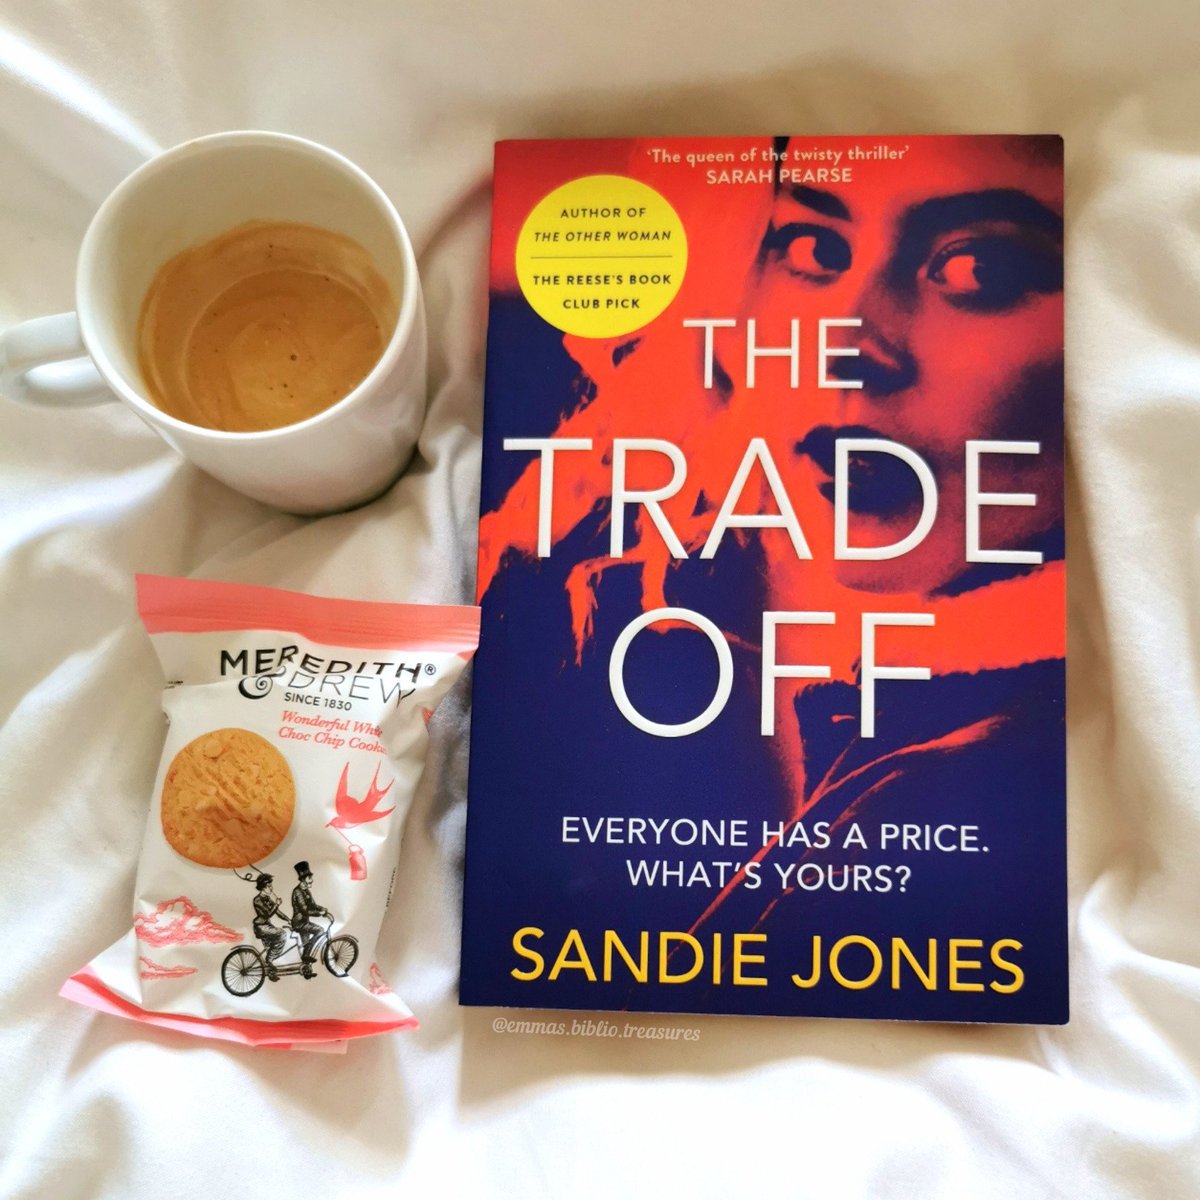 It's #firstlinesfriday and I'm sharing the compelling first lines from #TheTradeOff by @realsandiejones which is one of our @Squadpod3 featured books this month

instagram.com/p/C5GJoW7Lt96/…

#BookTwitter #SquadPod  #SquadpodBookFeatures